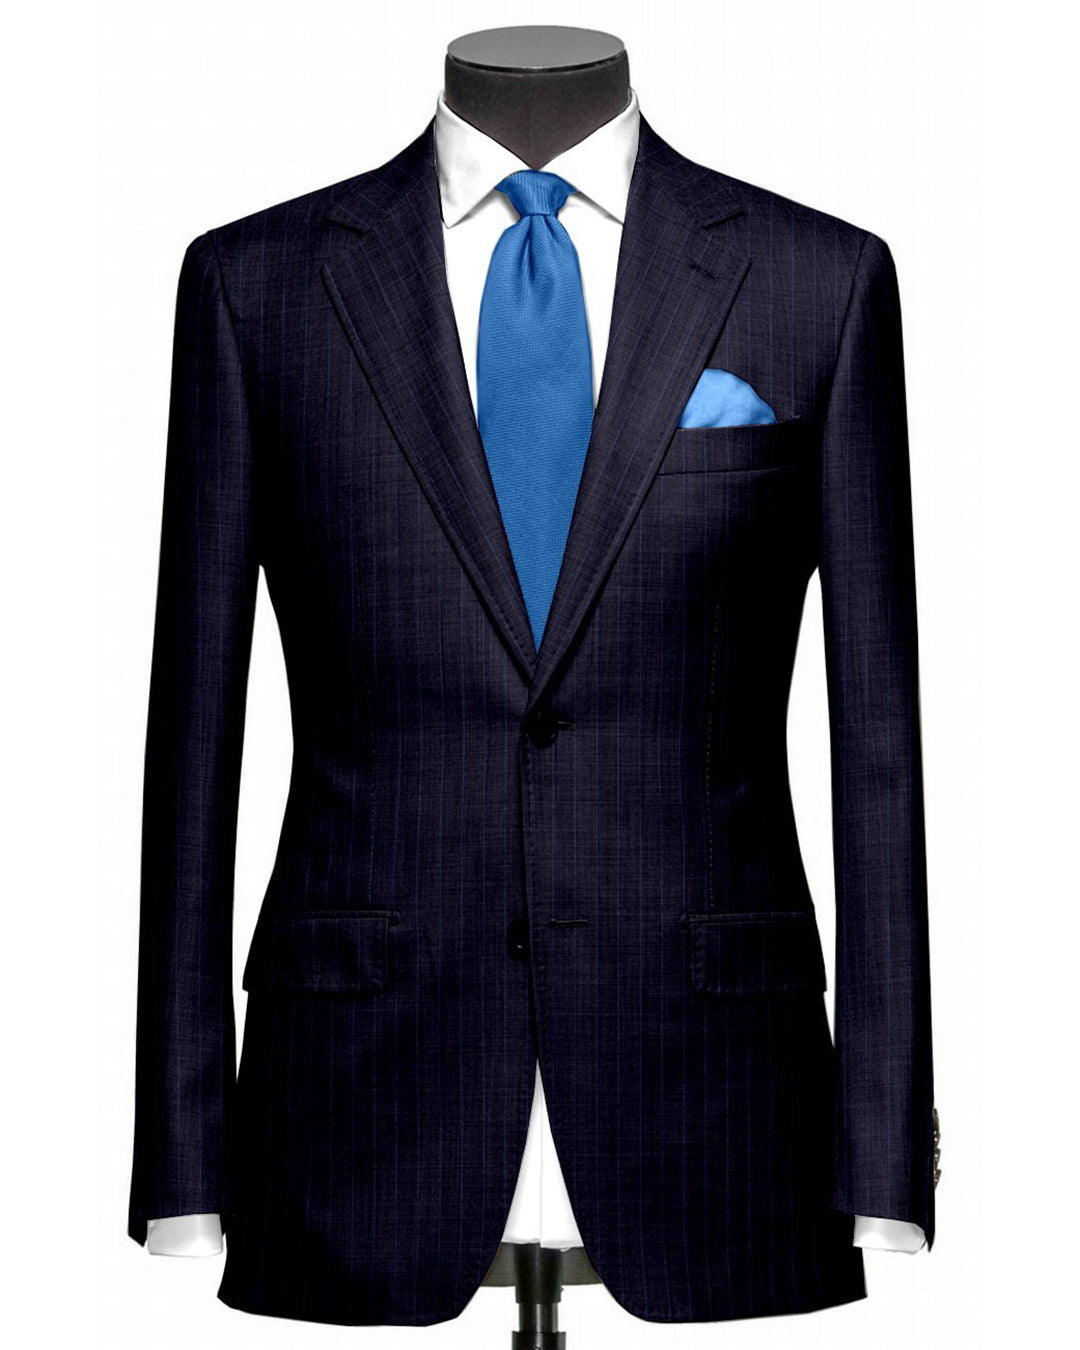 Dugdale Fine Worsted - Navy with Blue Pin Stripe Jacket